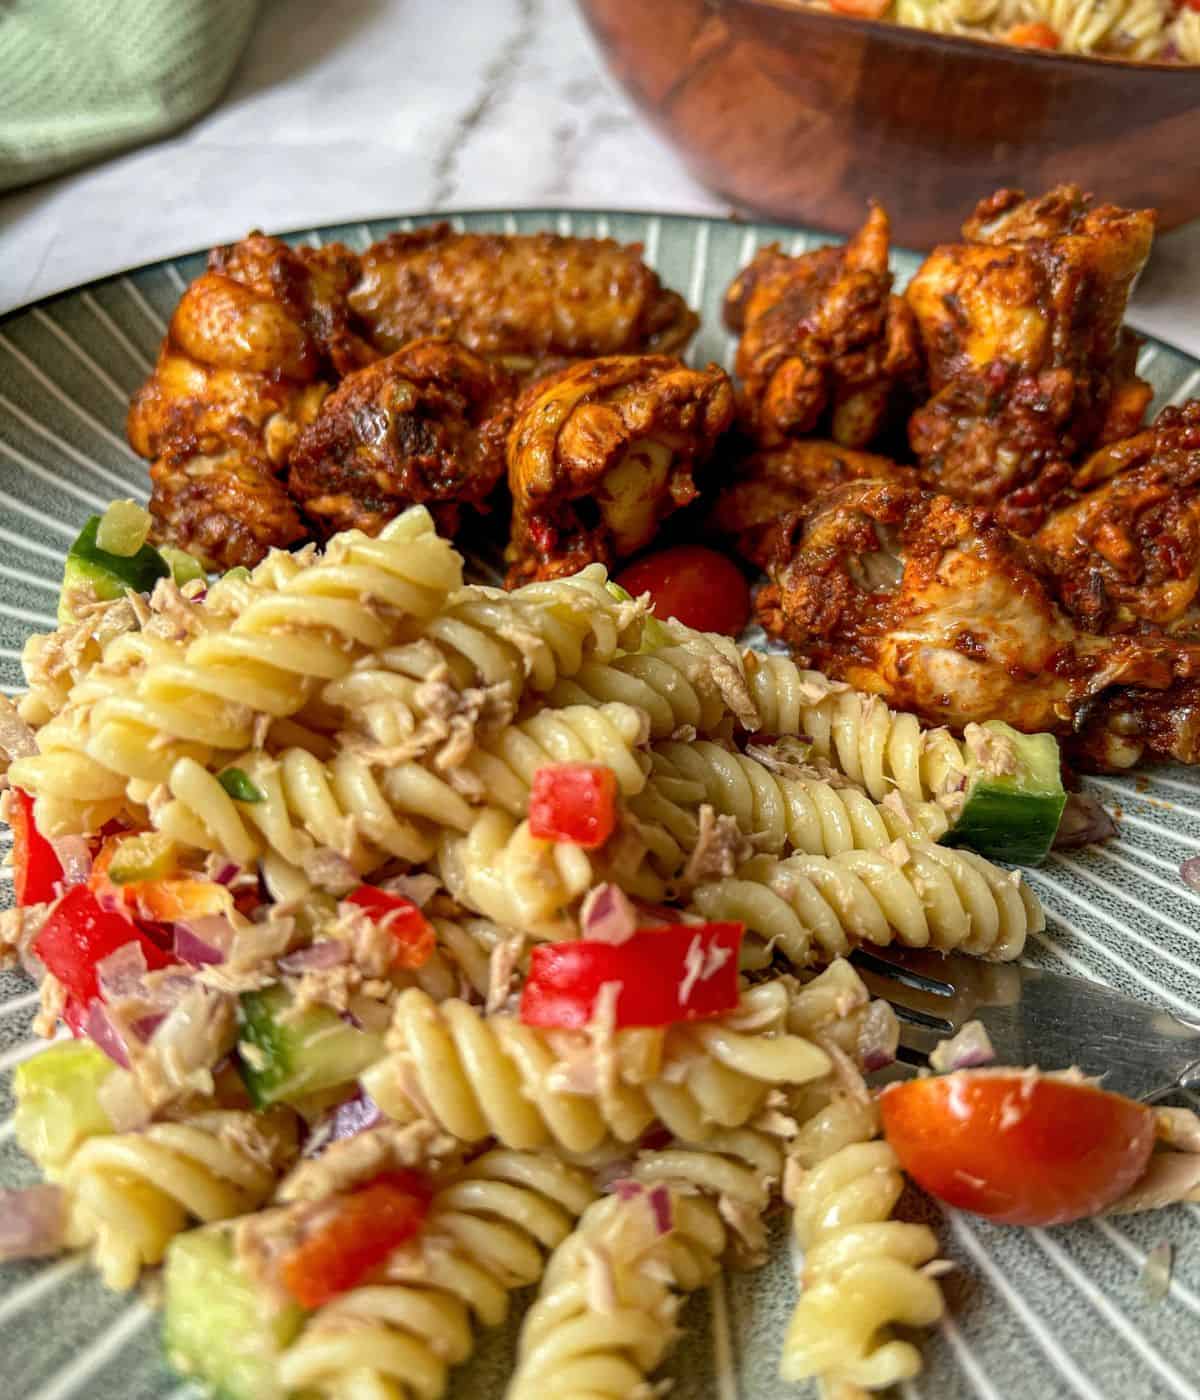 A plate containing tuna pasta salad and chicken wings.